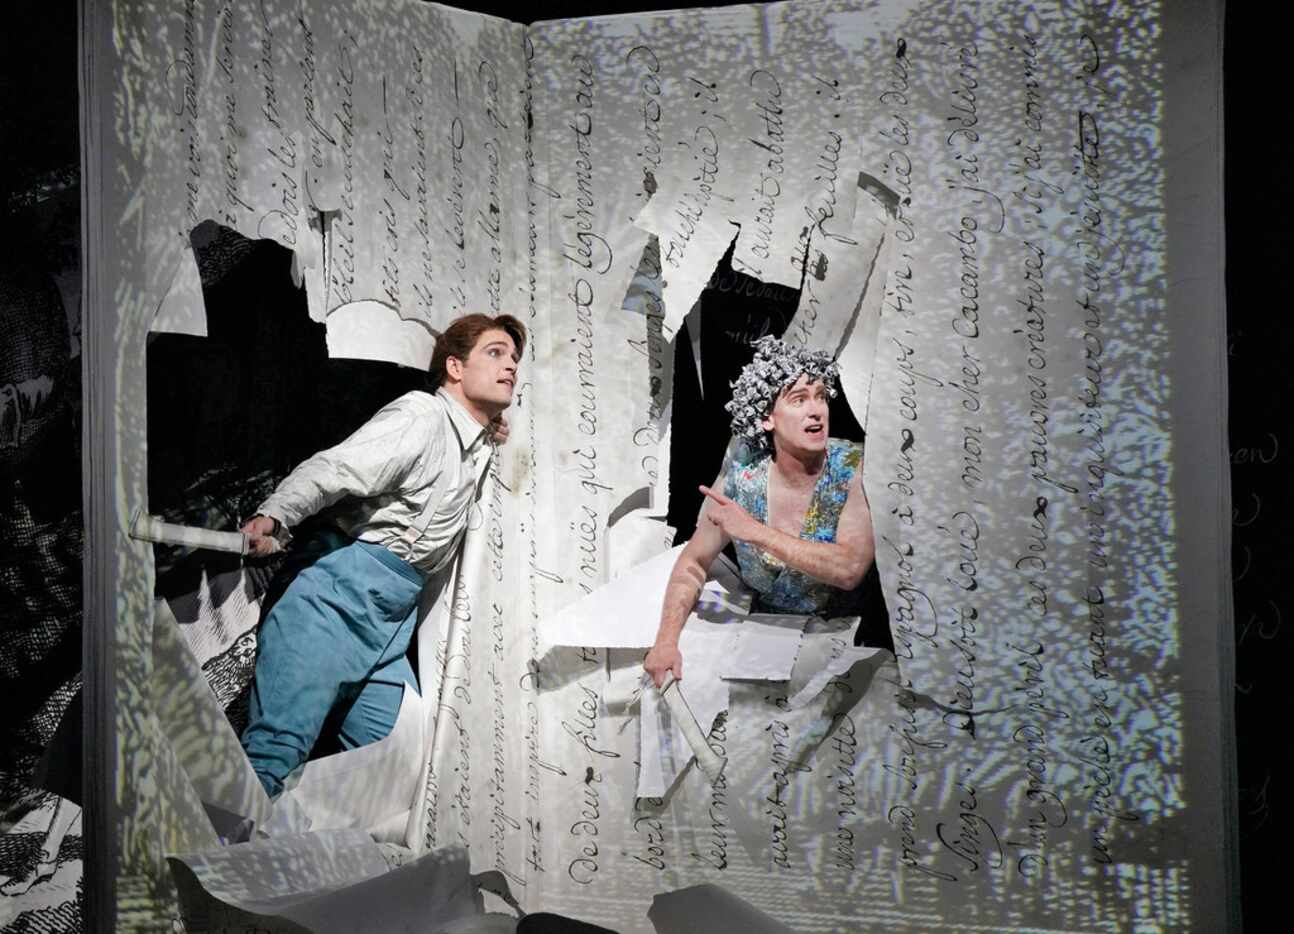 Chantal Thomas' scenery for Candide seems to represent giant sheaves of paper, flat or...